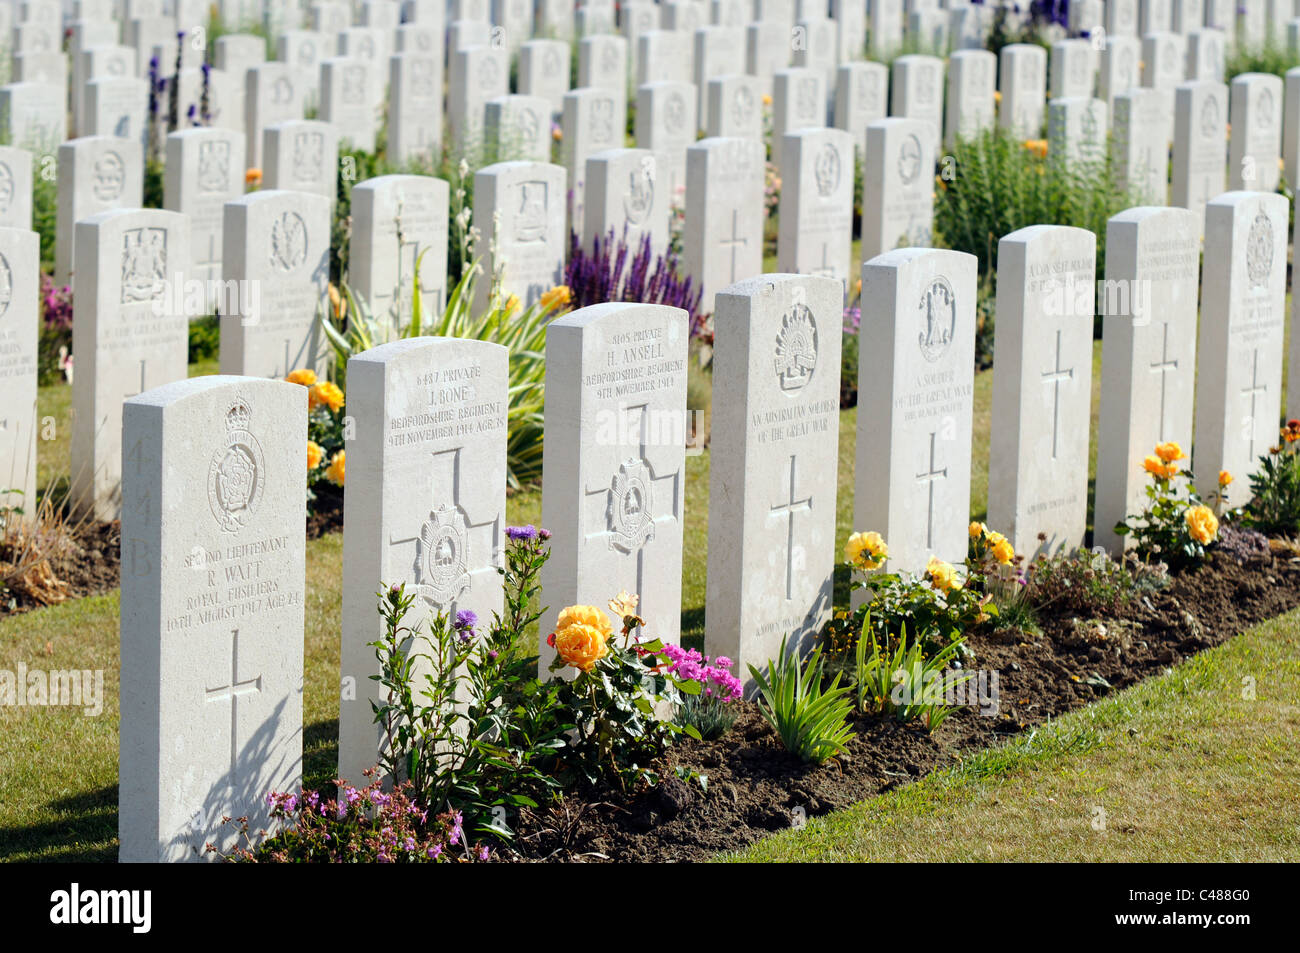 Graves at Tyne Cot, a WW1 cemetery, near Ypres, Belgium. Stock Photo